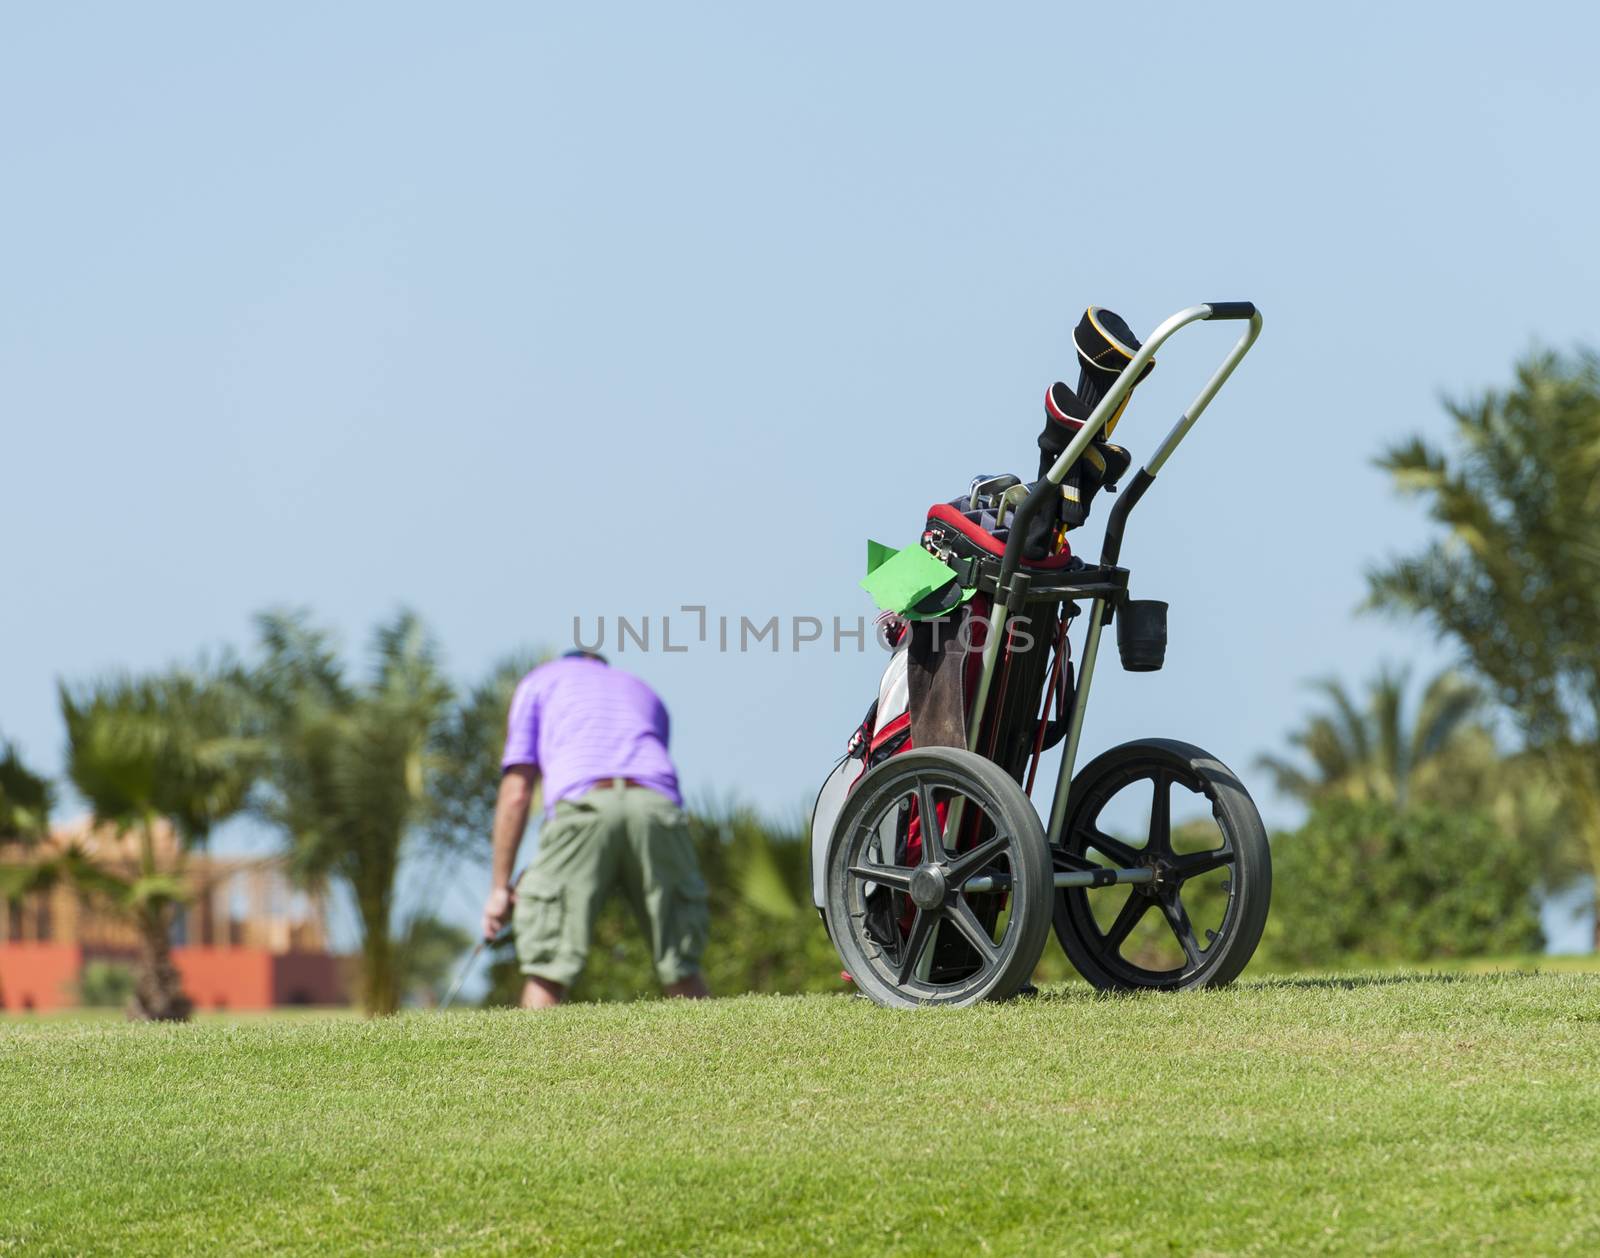 Golf caddy trolley and bag on a golf course with golfer in the distance